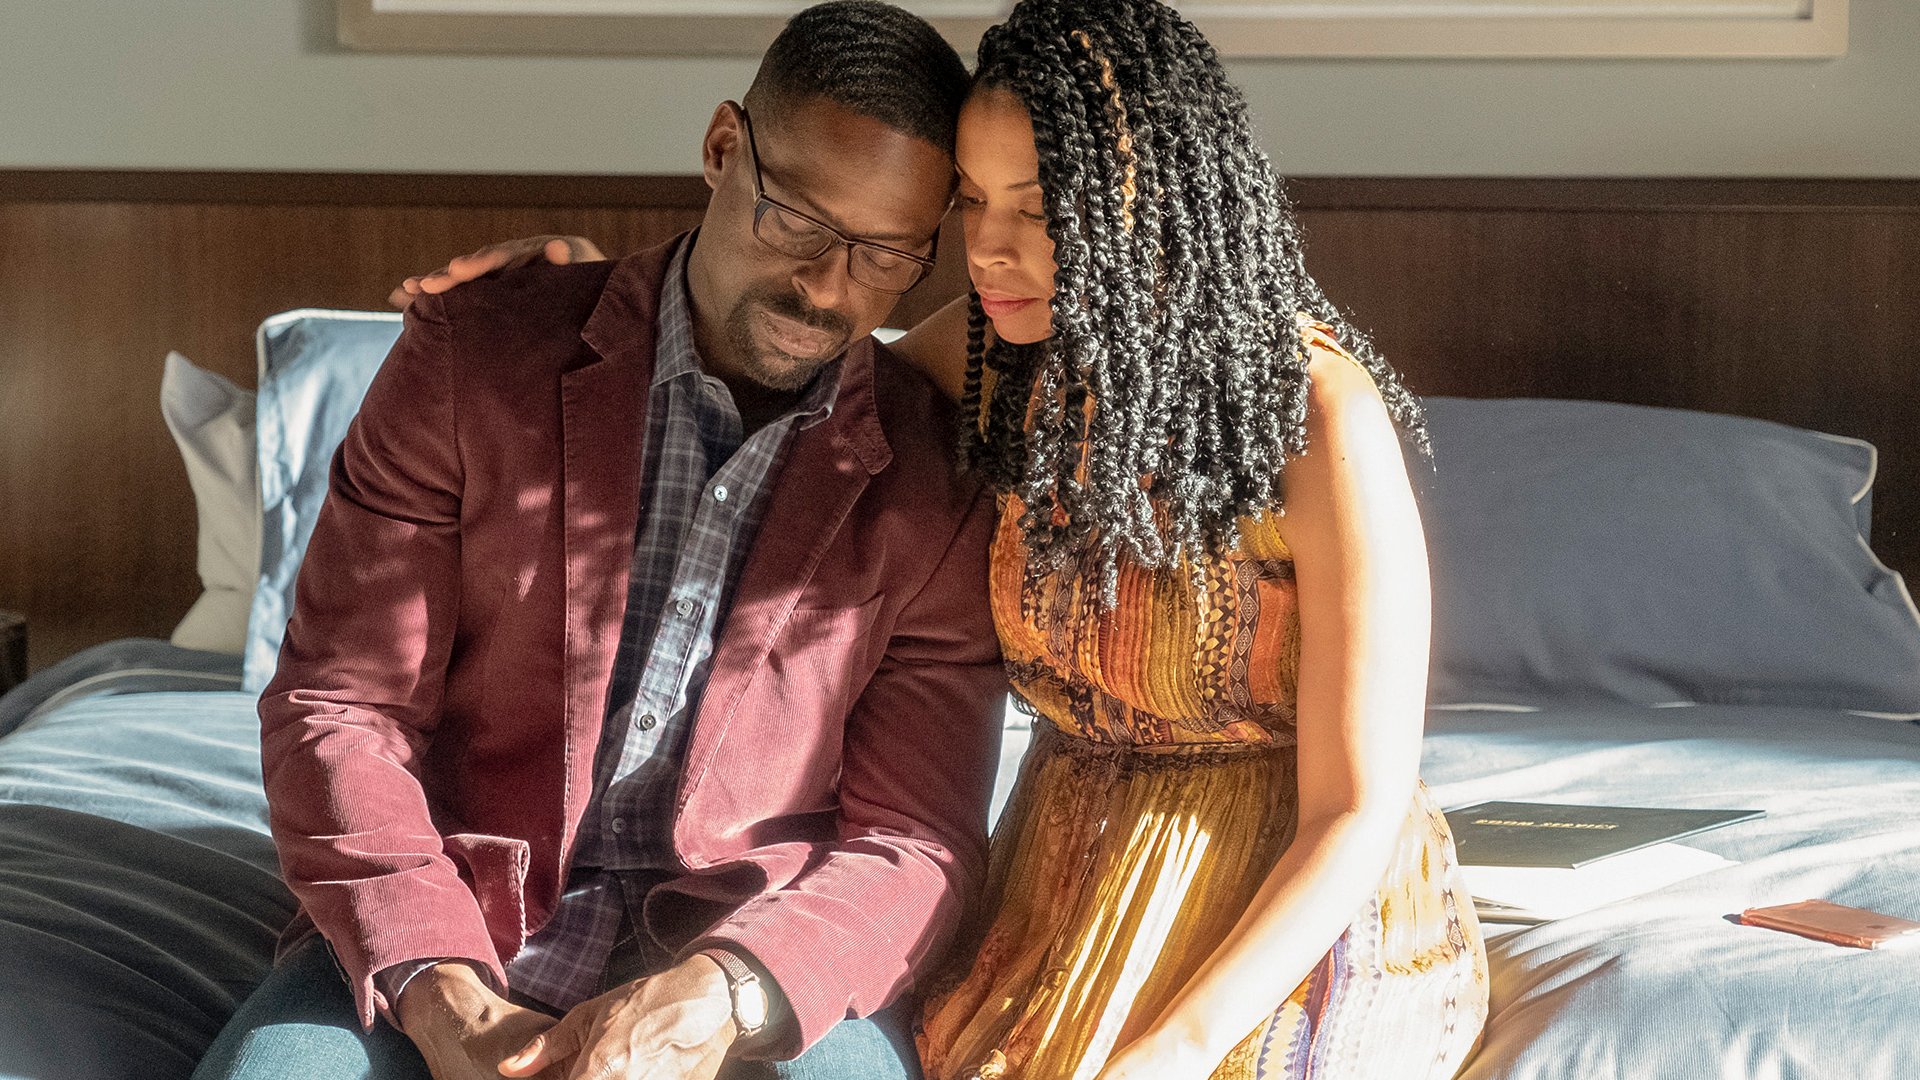 Sterling K. Brown as Randall, Susan Kelechi Watson as Beth holding each other in 'This Is Us' Season 4 Episode 18